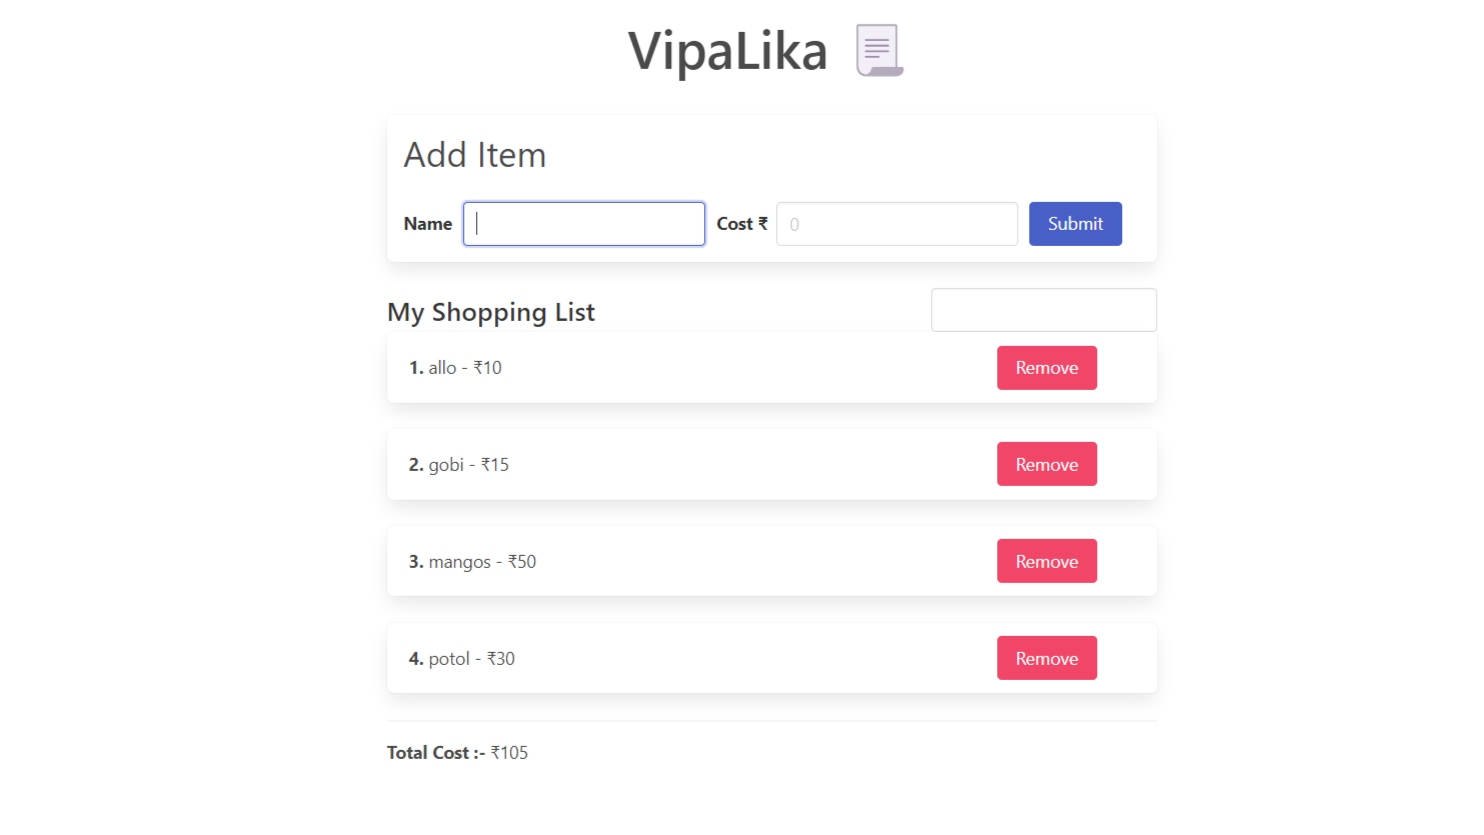 VipaLika app after adding some items with cost